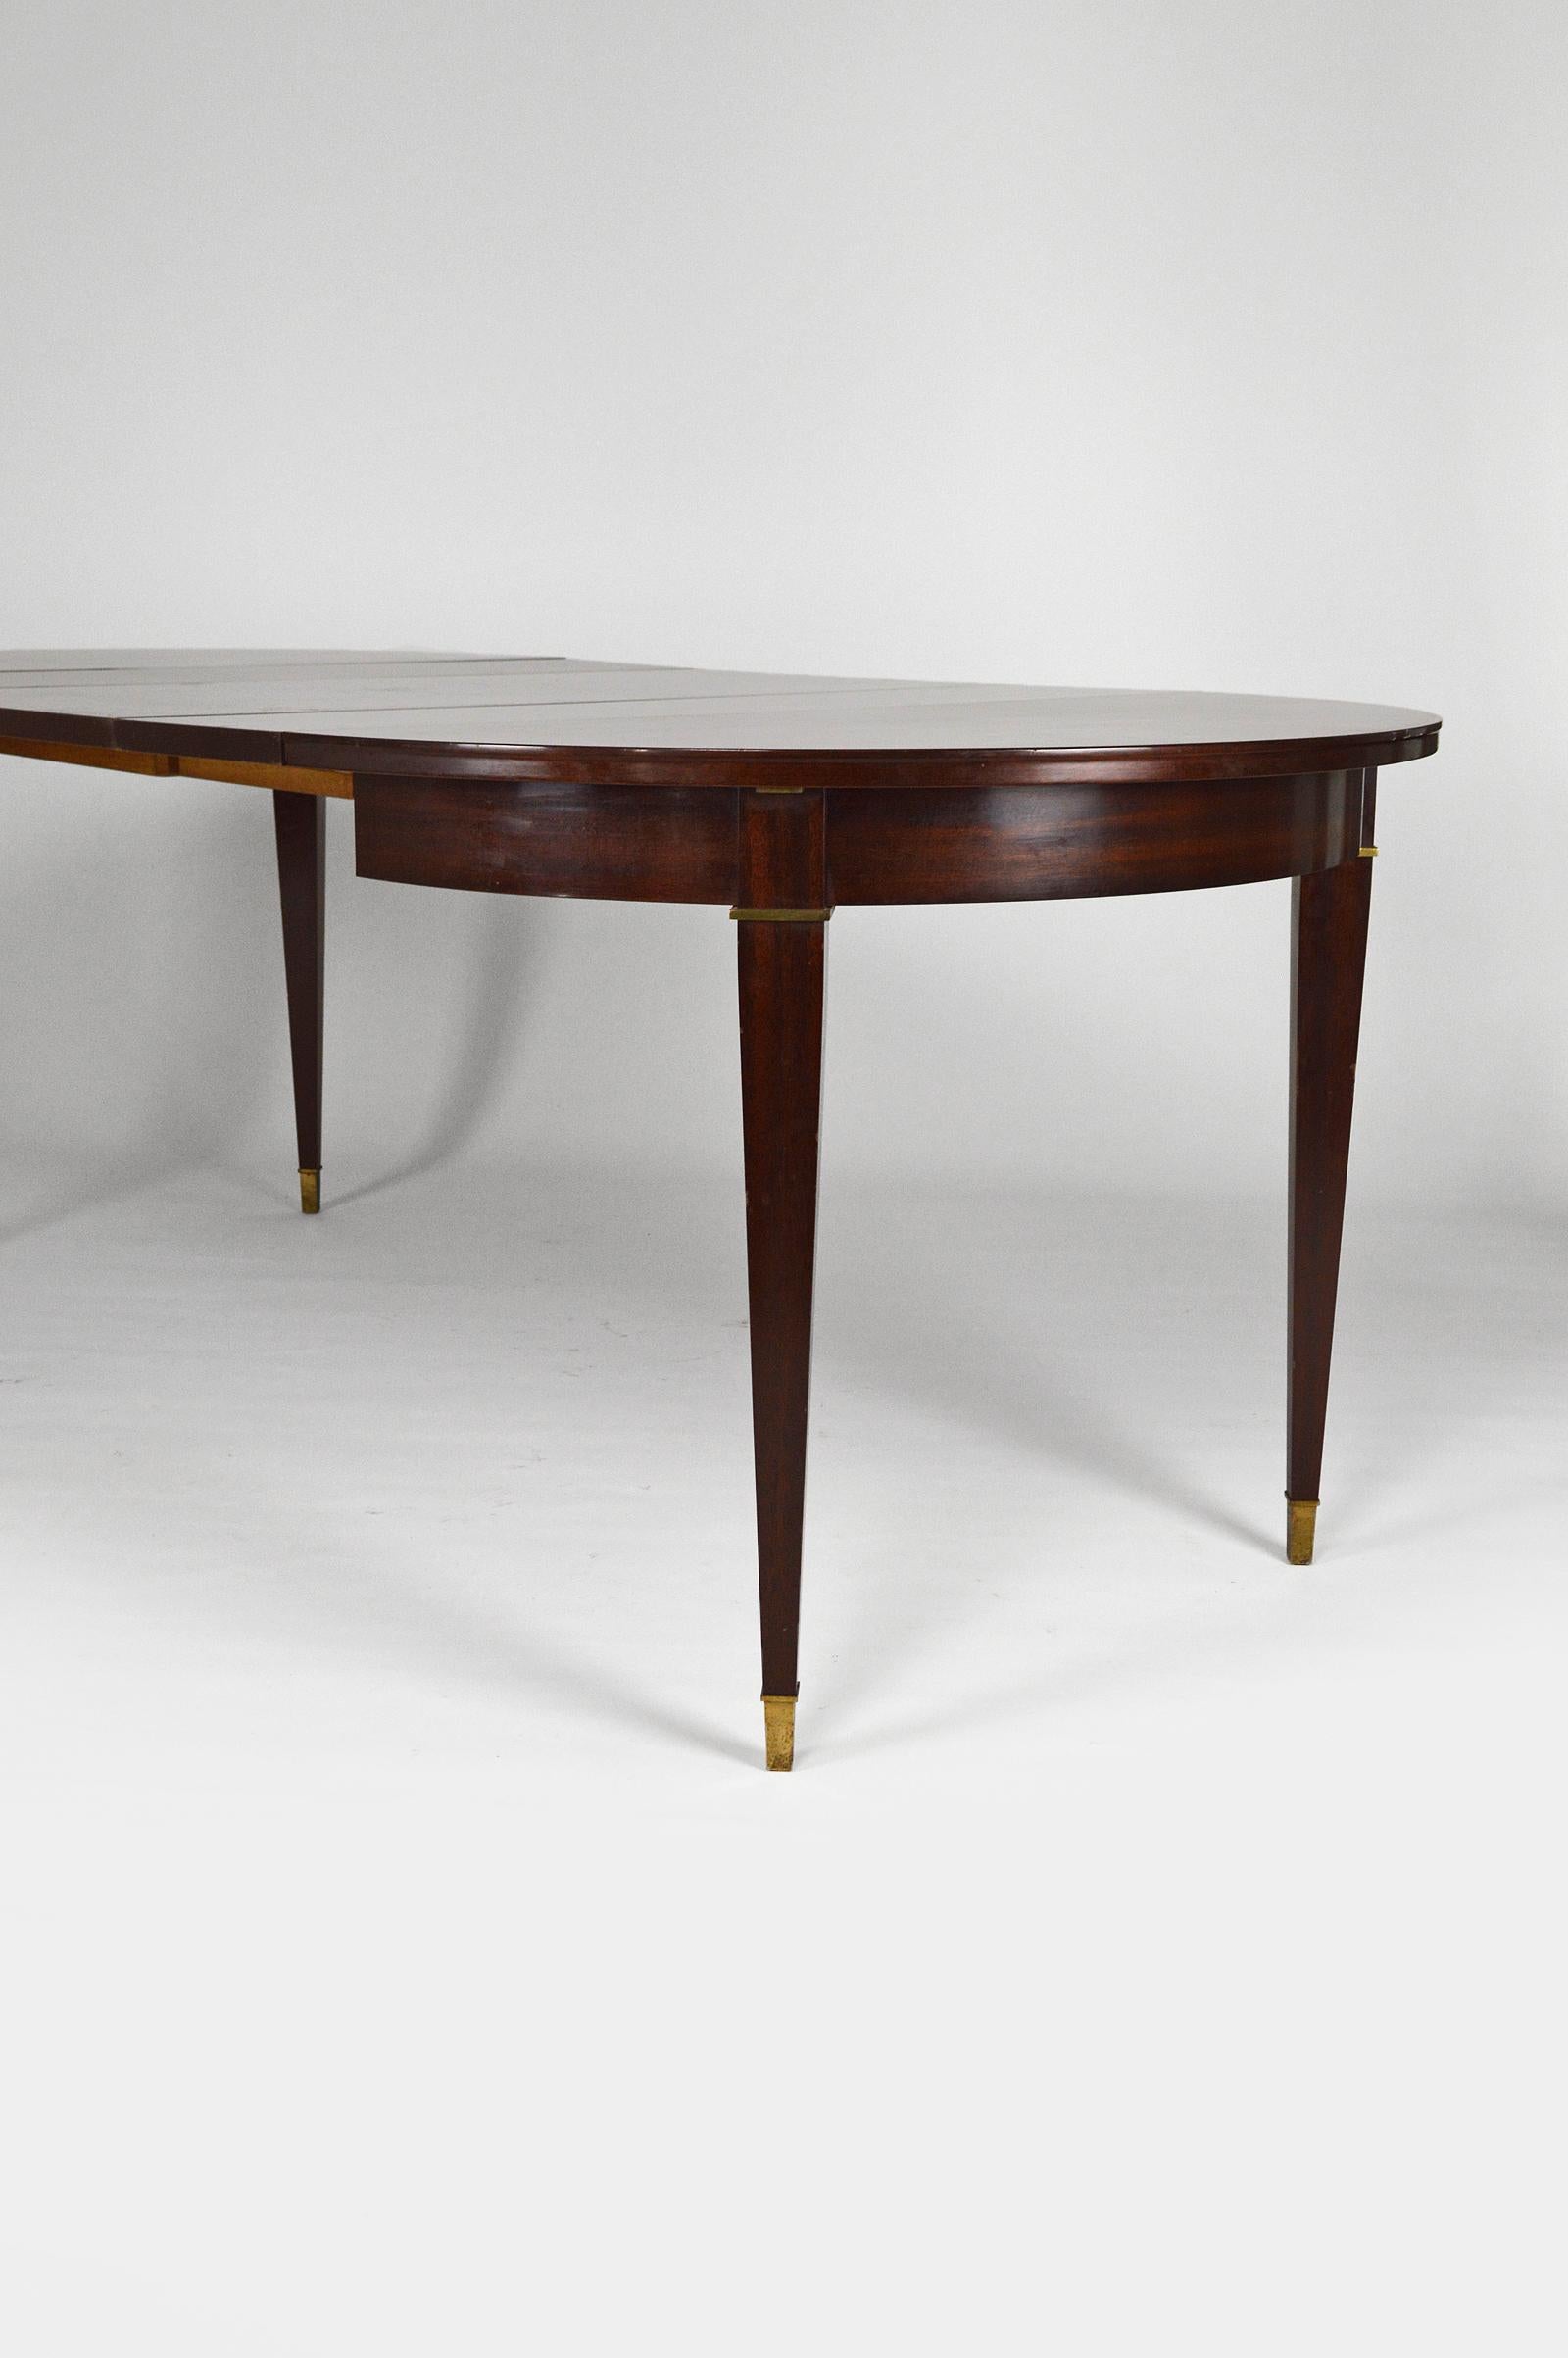 Art Deco Mahogany Round Table with Extensions, by Jacques Adnet, circa 1940 For Sale 7